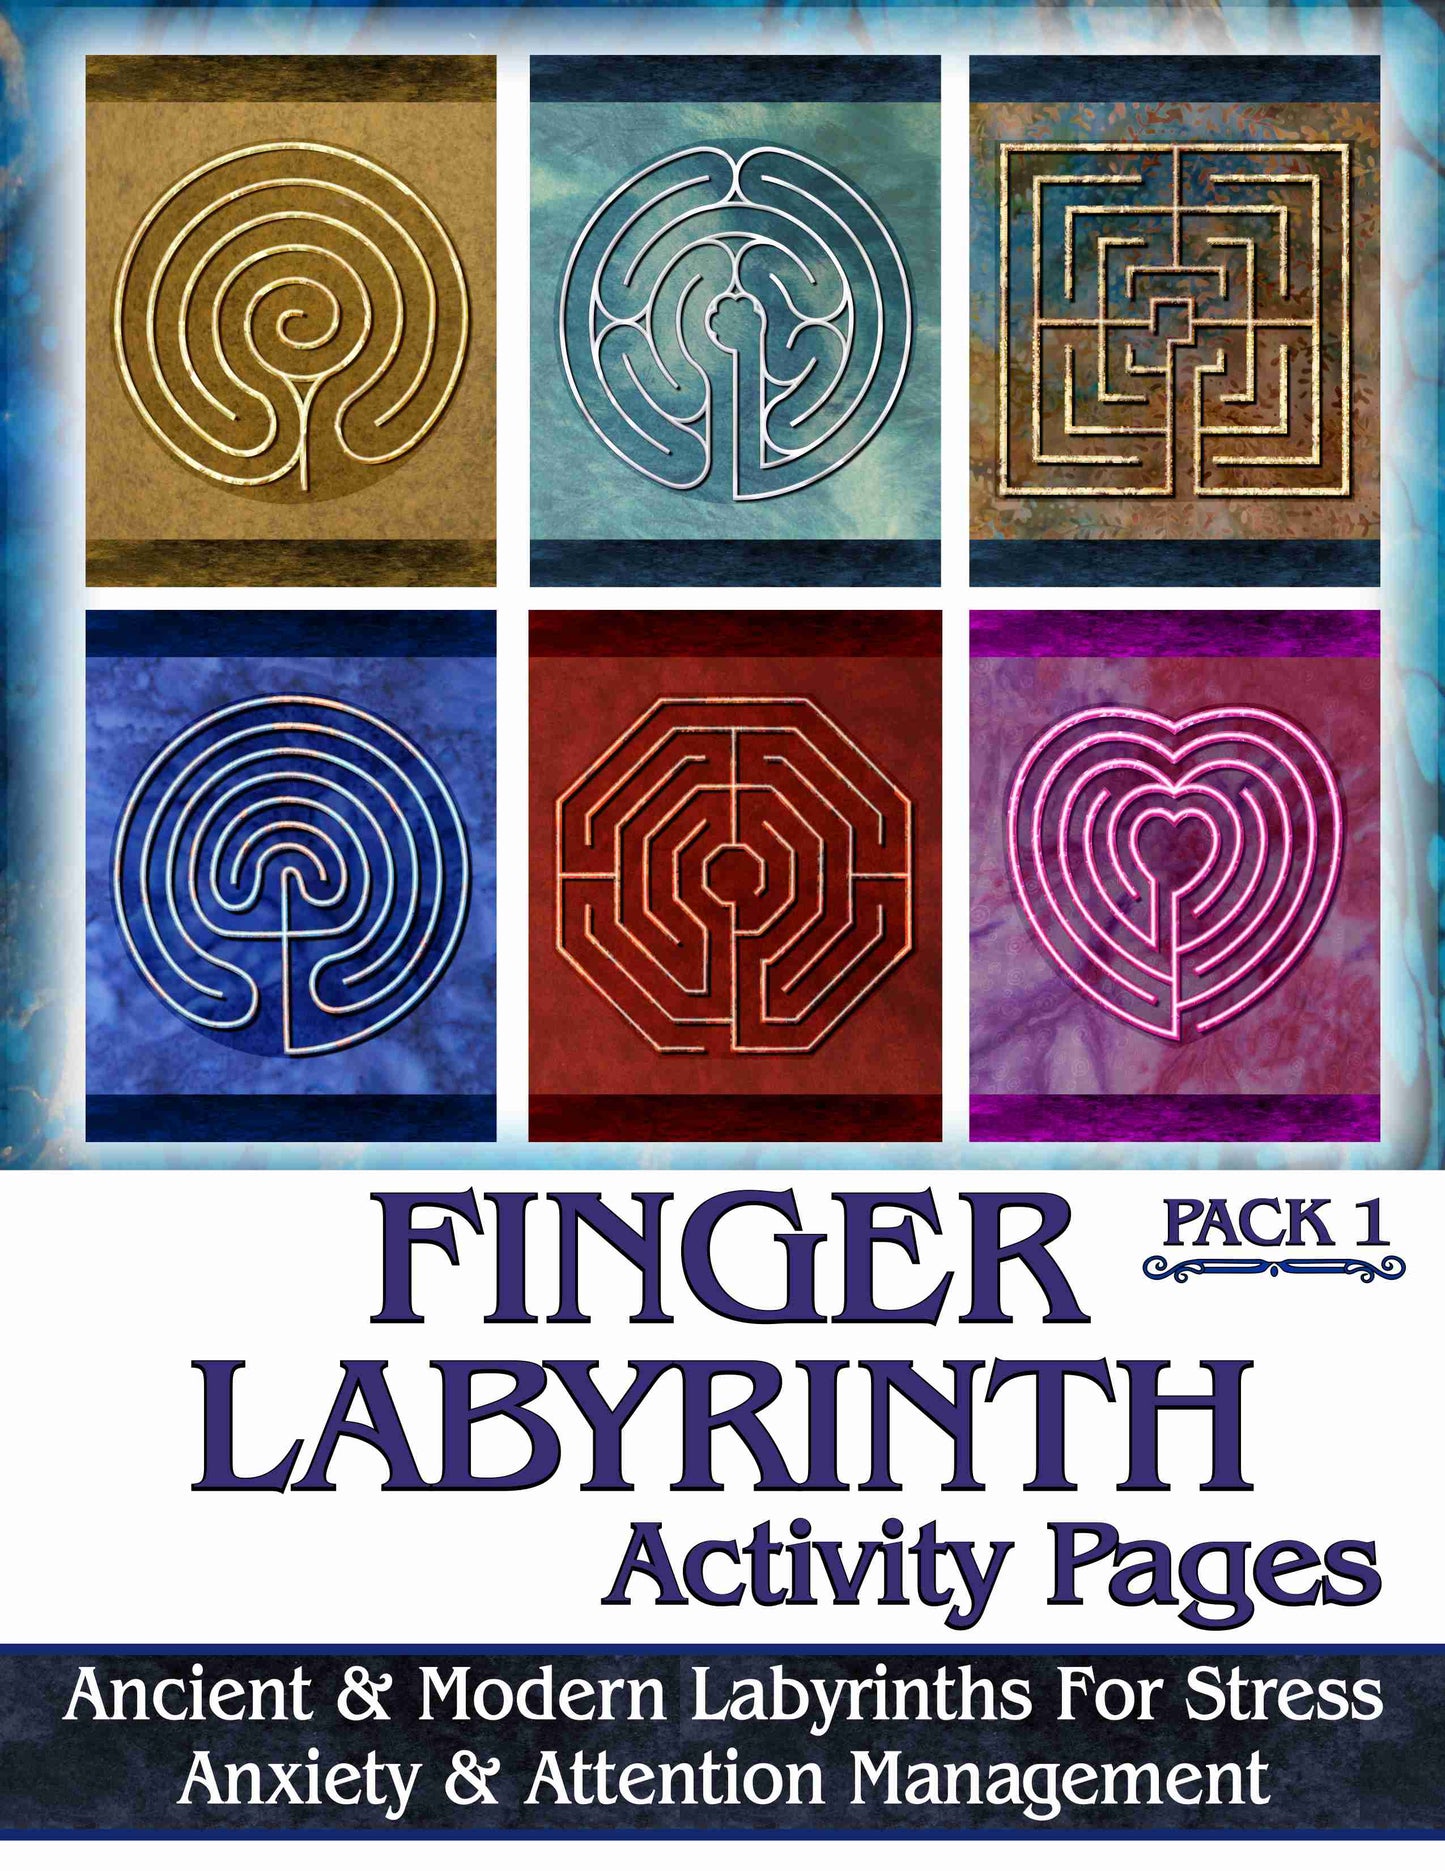 Finger Labyrinth Activity Pages Pack 1: Mindful Tracing Art